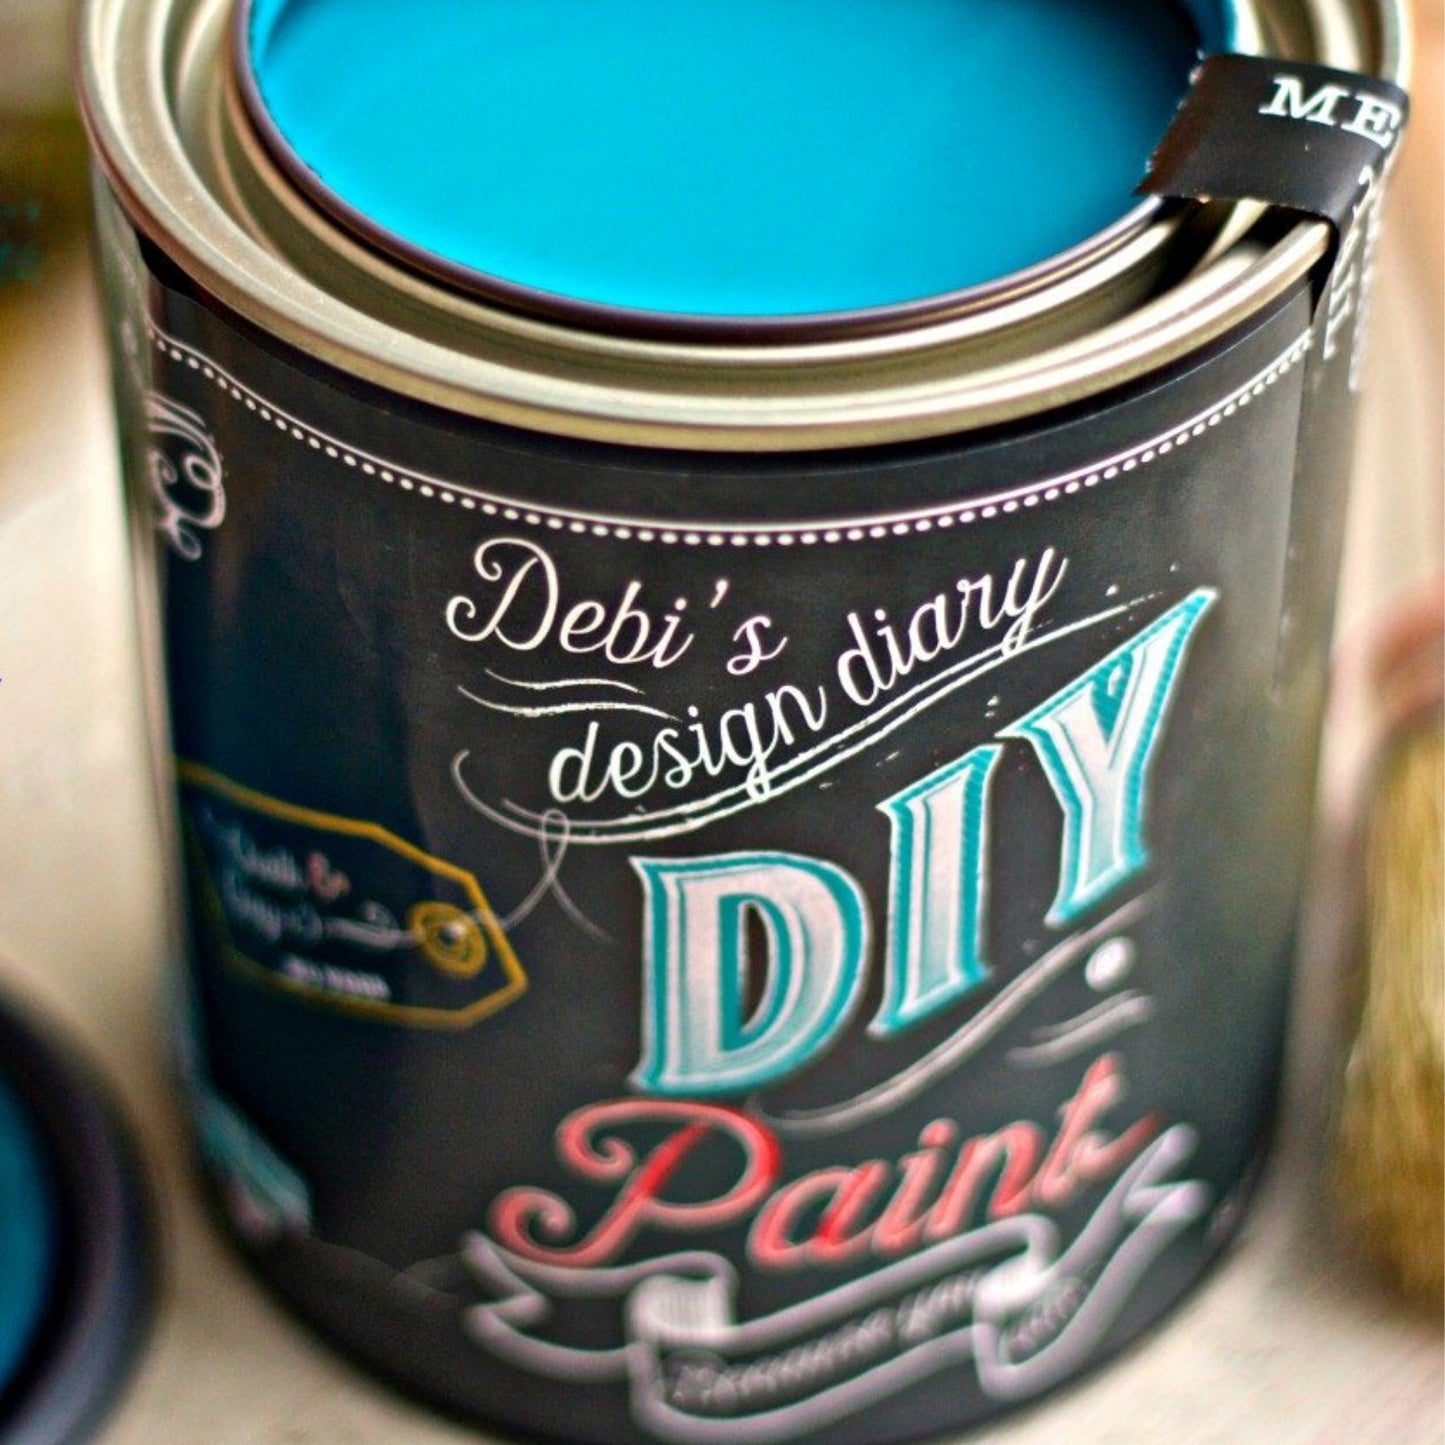 Mermaid Tale by  Debi's Design Diary DIY Paint available at Milton's Daughter